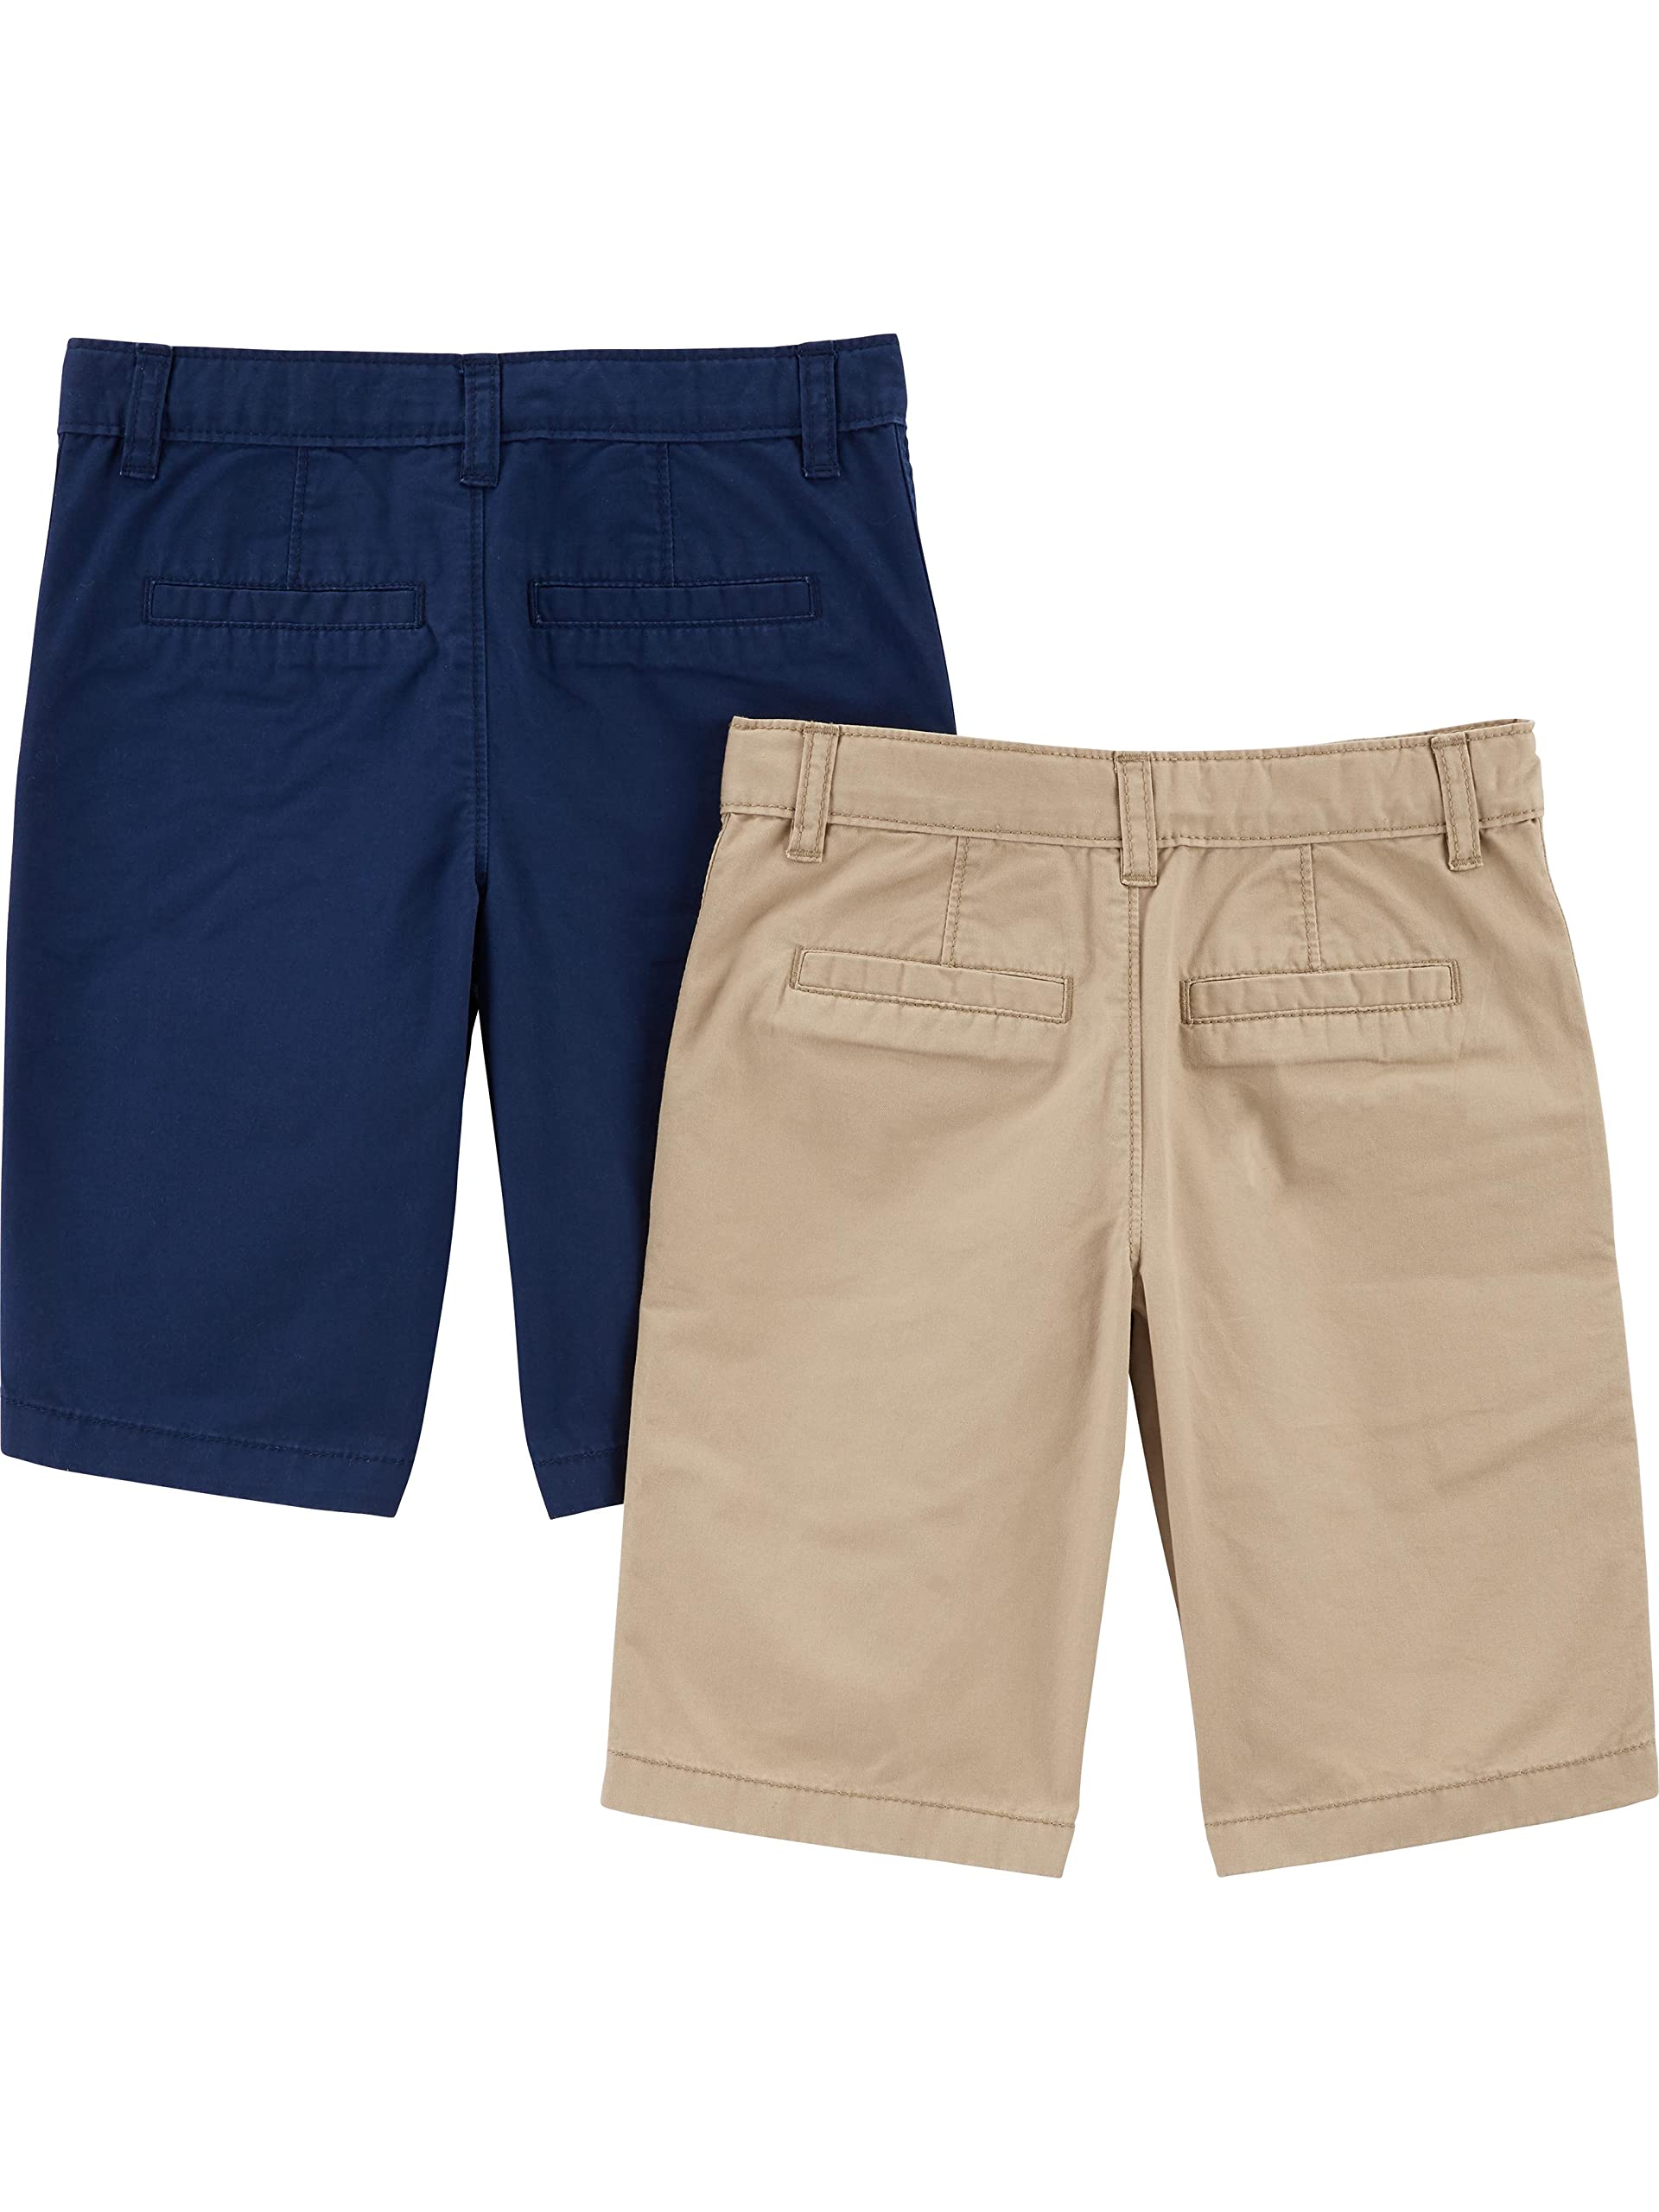 Simple Joys by Carter's Boys' Flat Front Shorts, Pack of 2